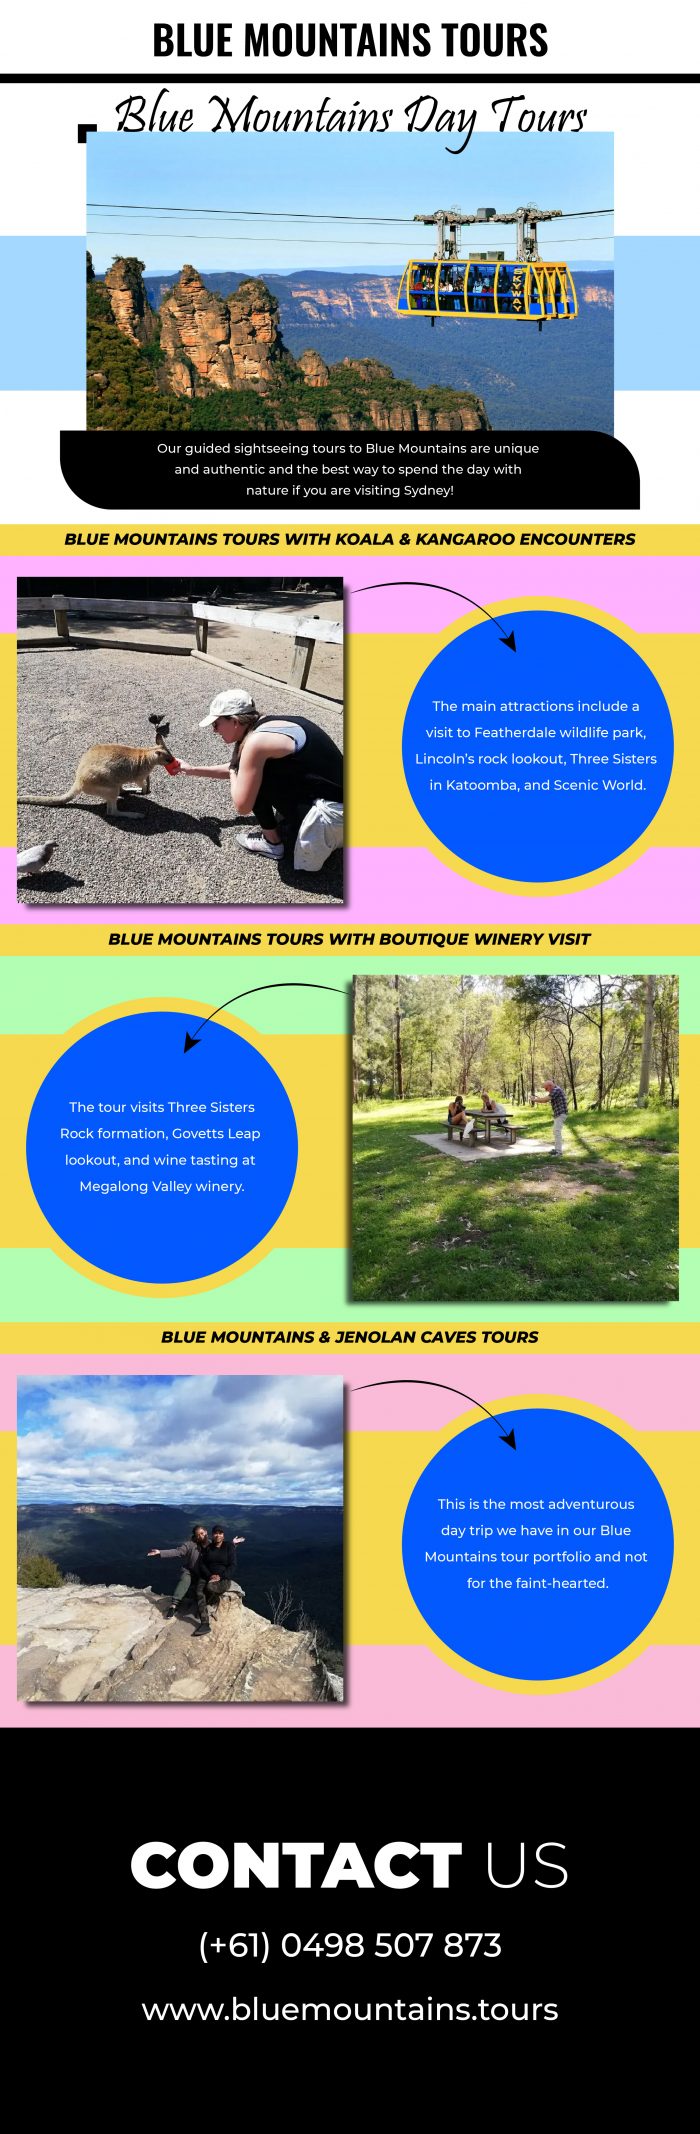 Blue Mountains Day Tours from Sydney – Blue Mountains Tours